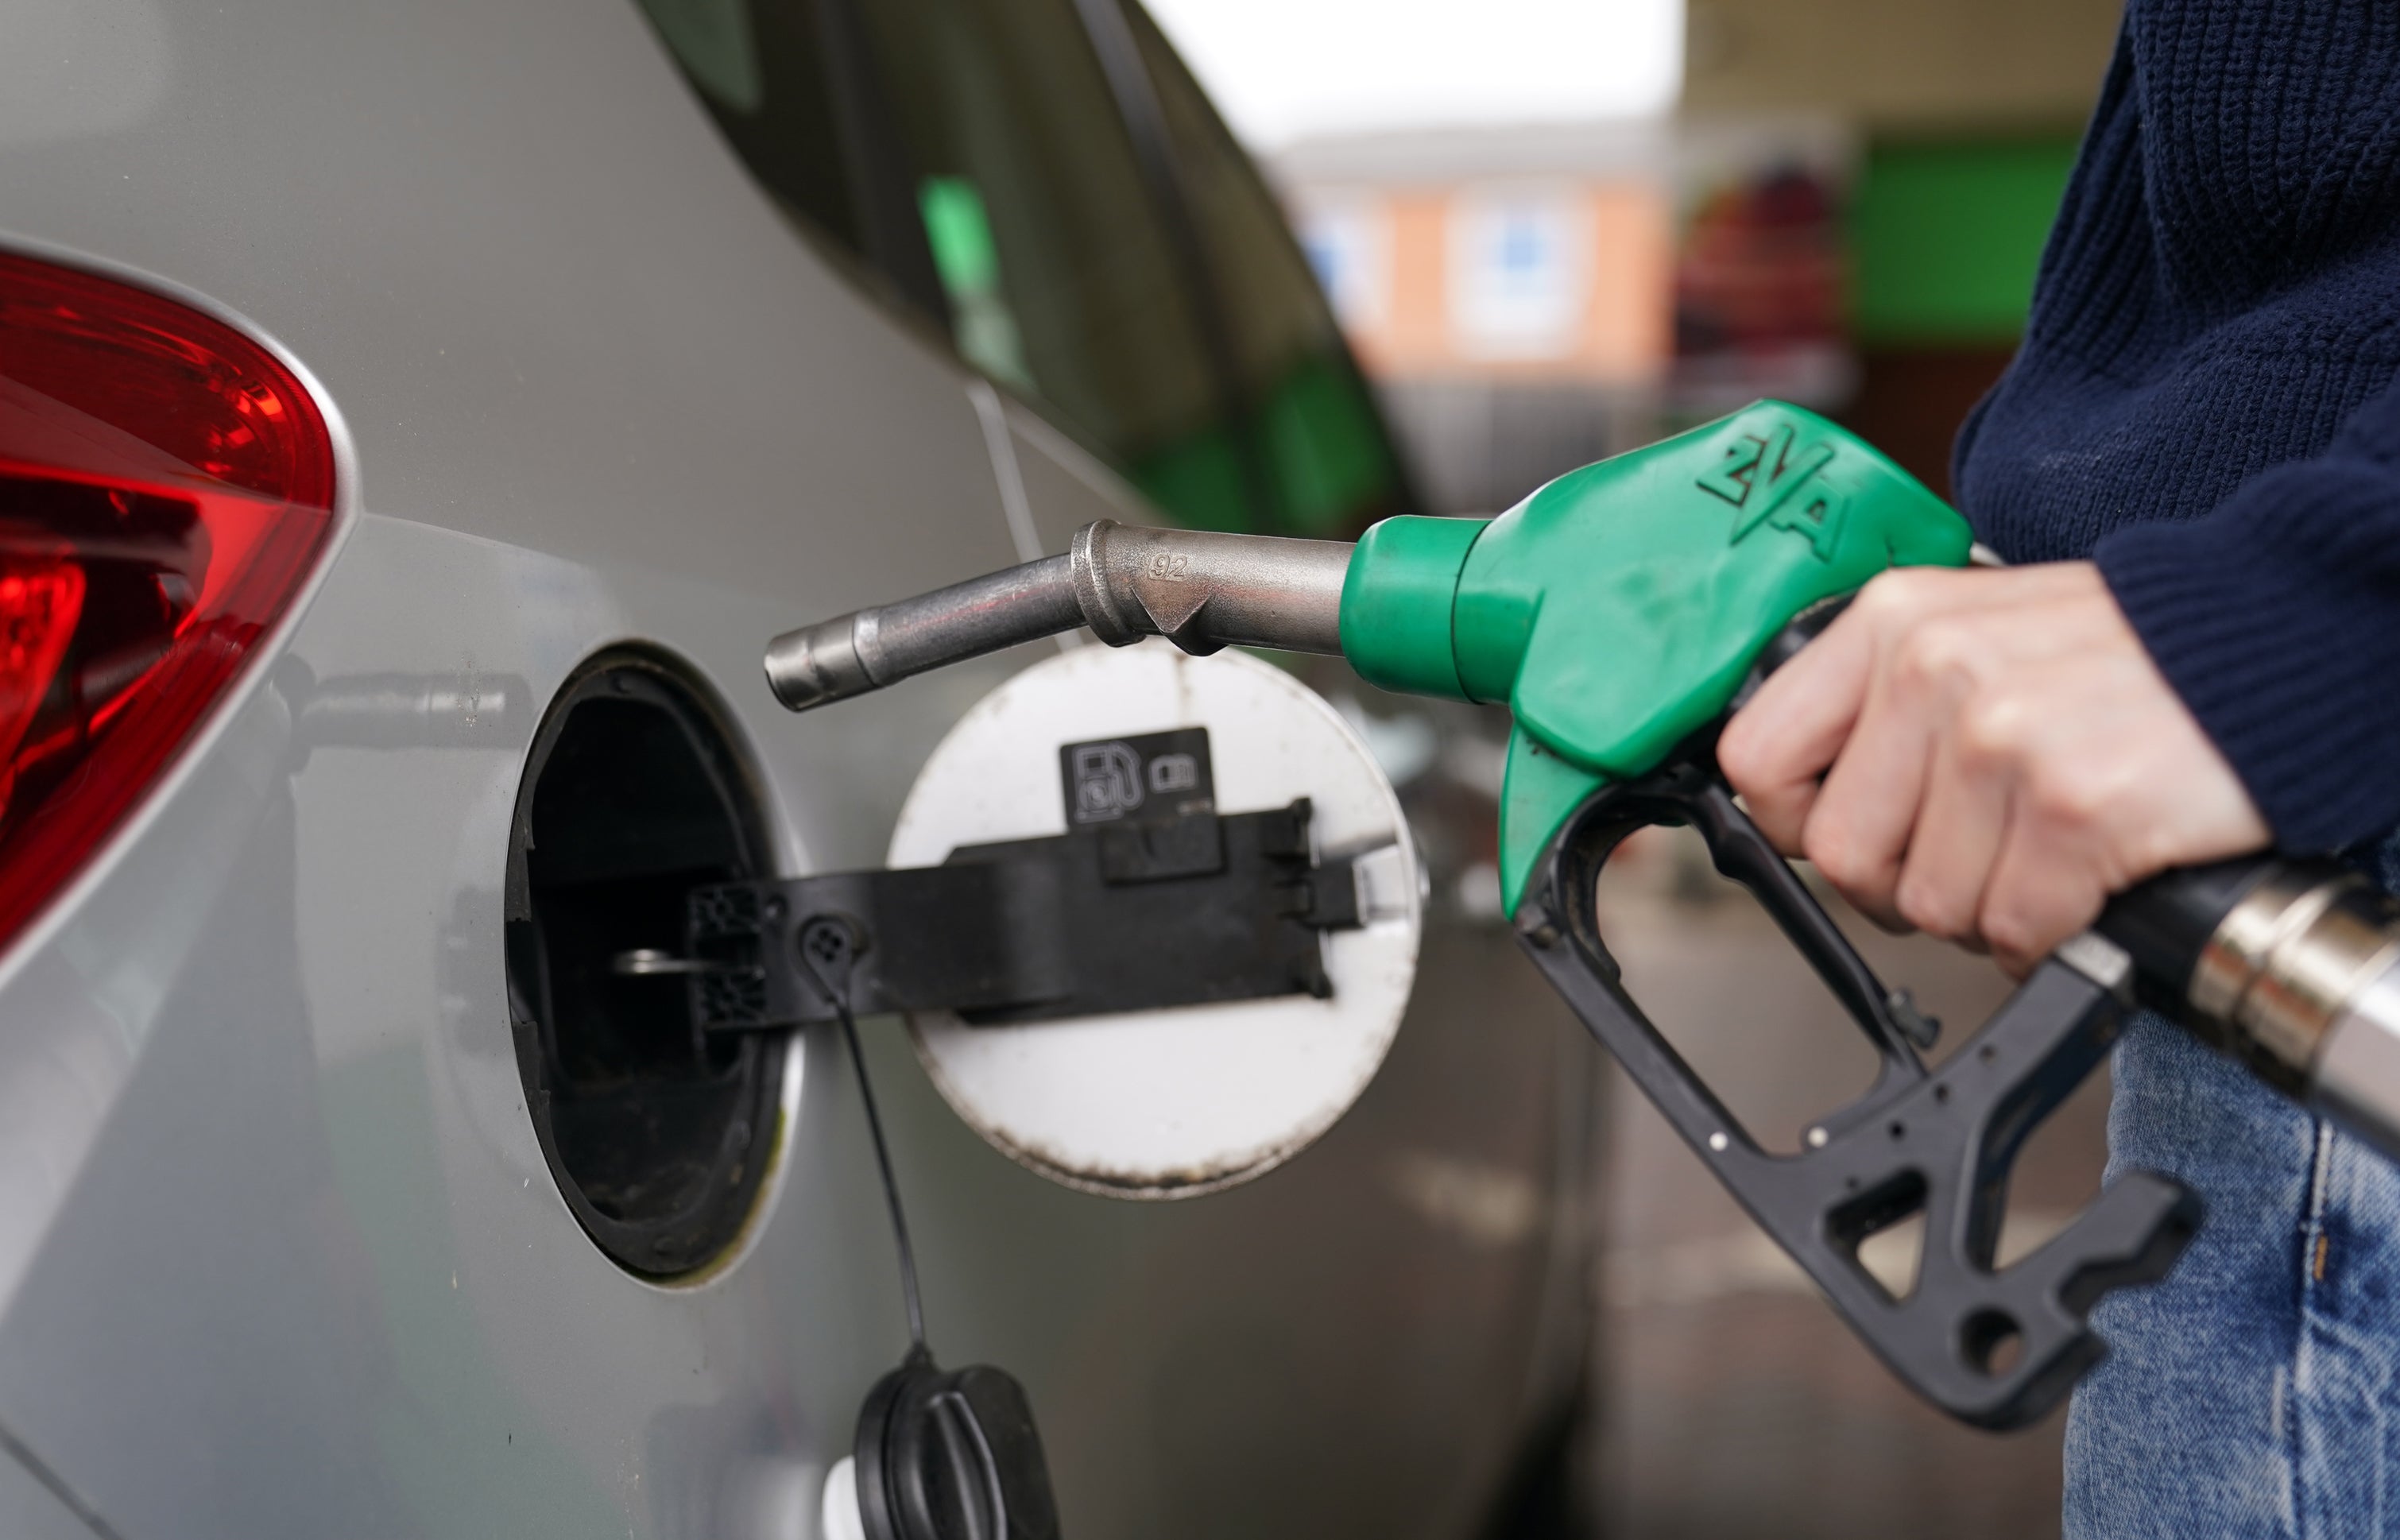 Fuel thefts from UK filling stations have reached record levels amid soaring pump prices (Joe Giddens/PA)